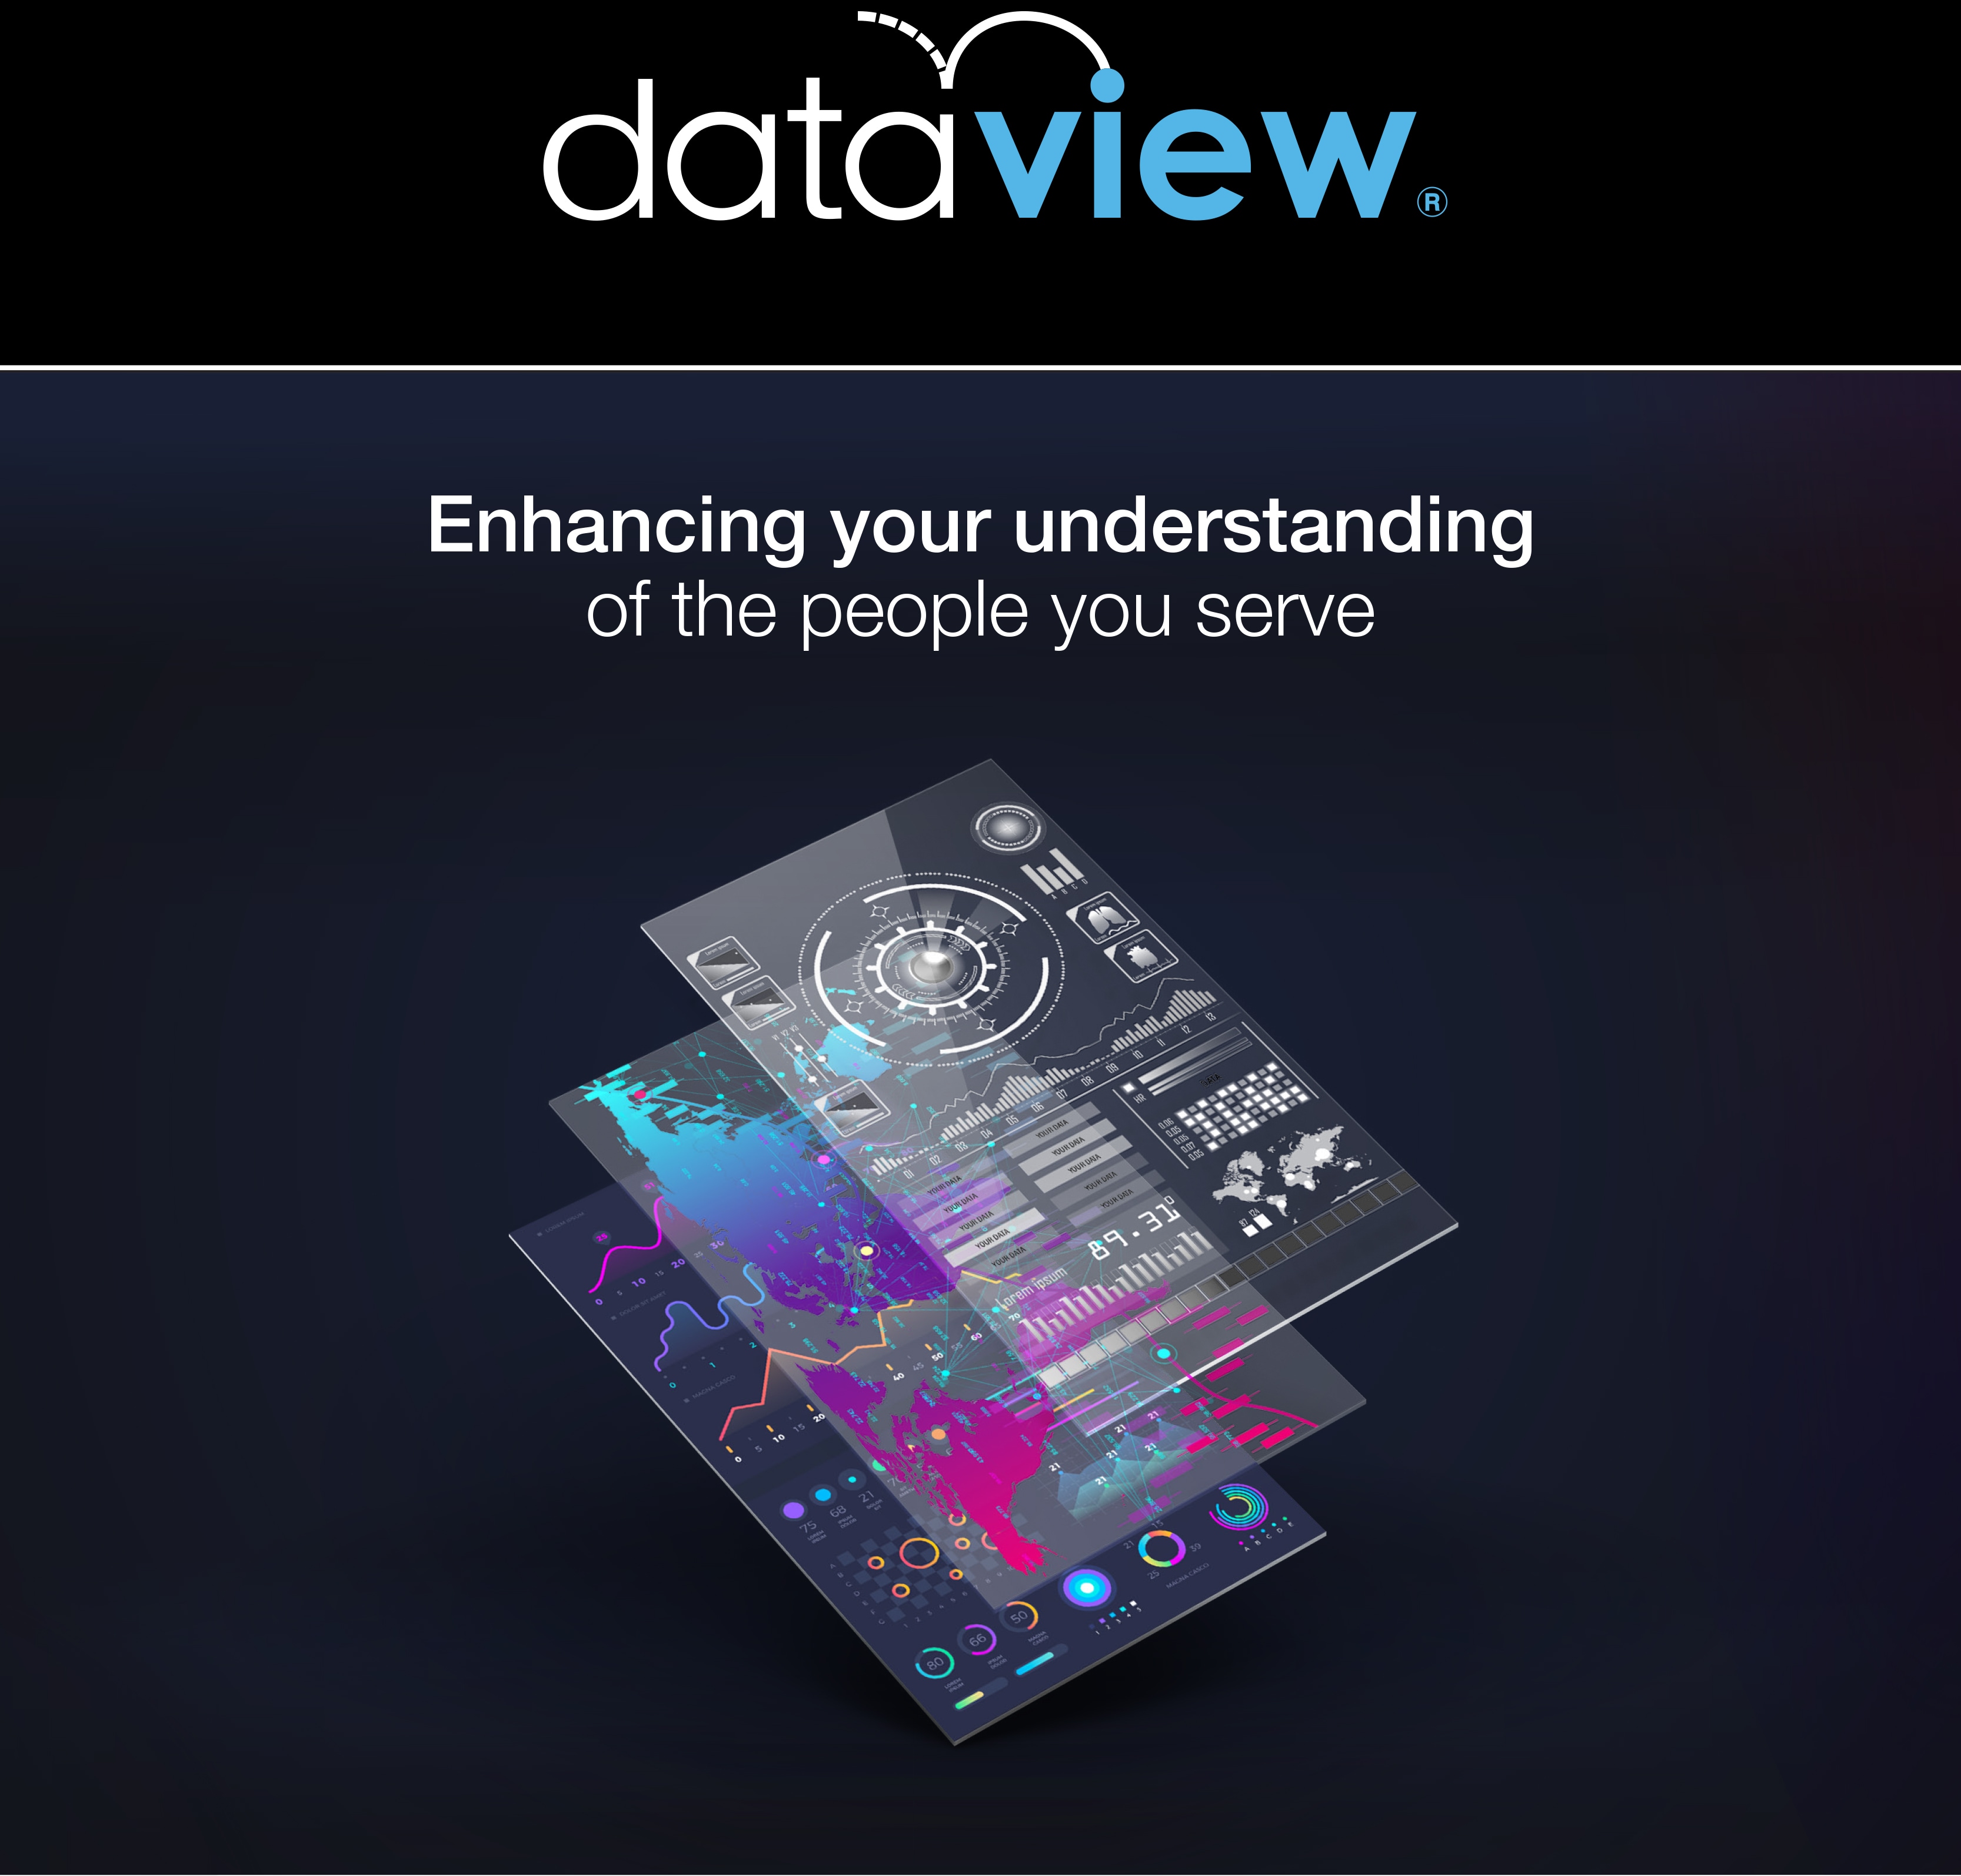 Dataview: Use the power of technology and data for impact